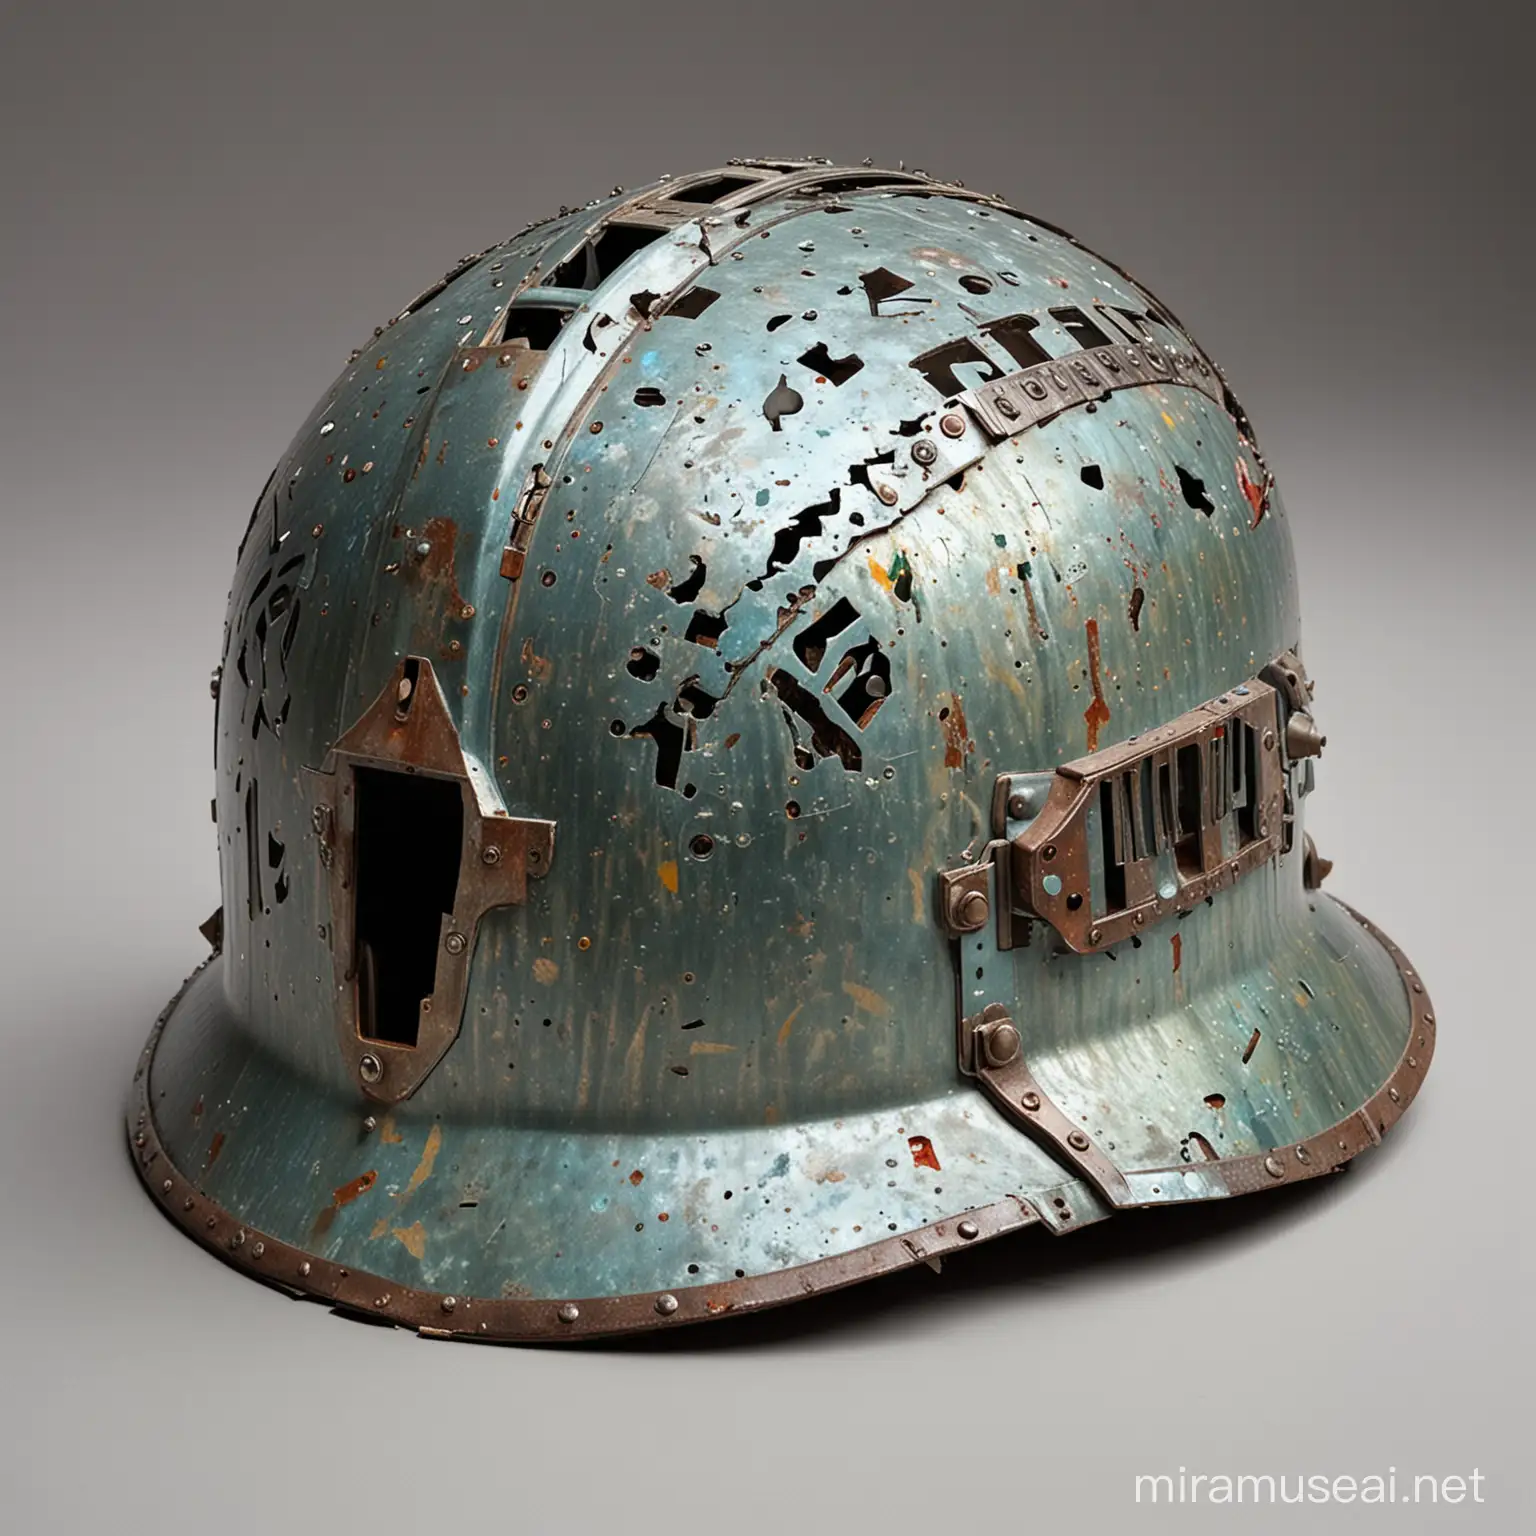 Iridescent WWII Helmet with Circuitry and Battle Damage